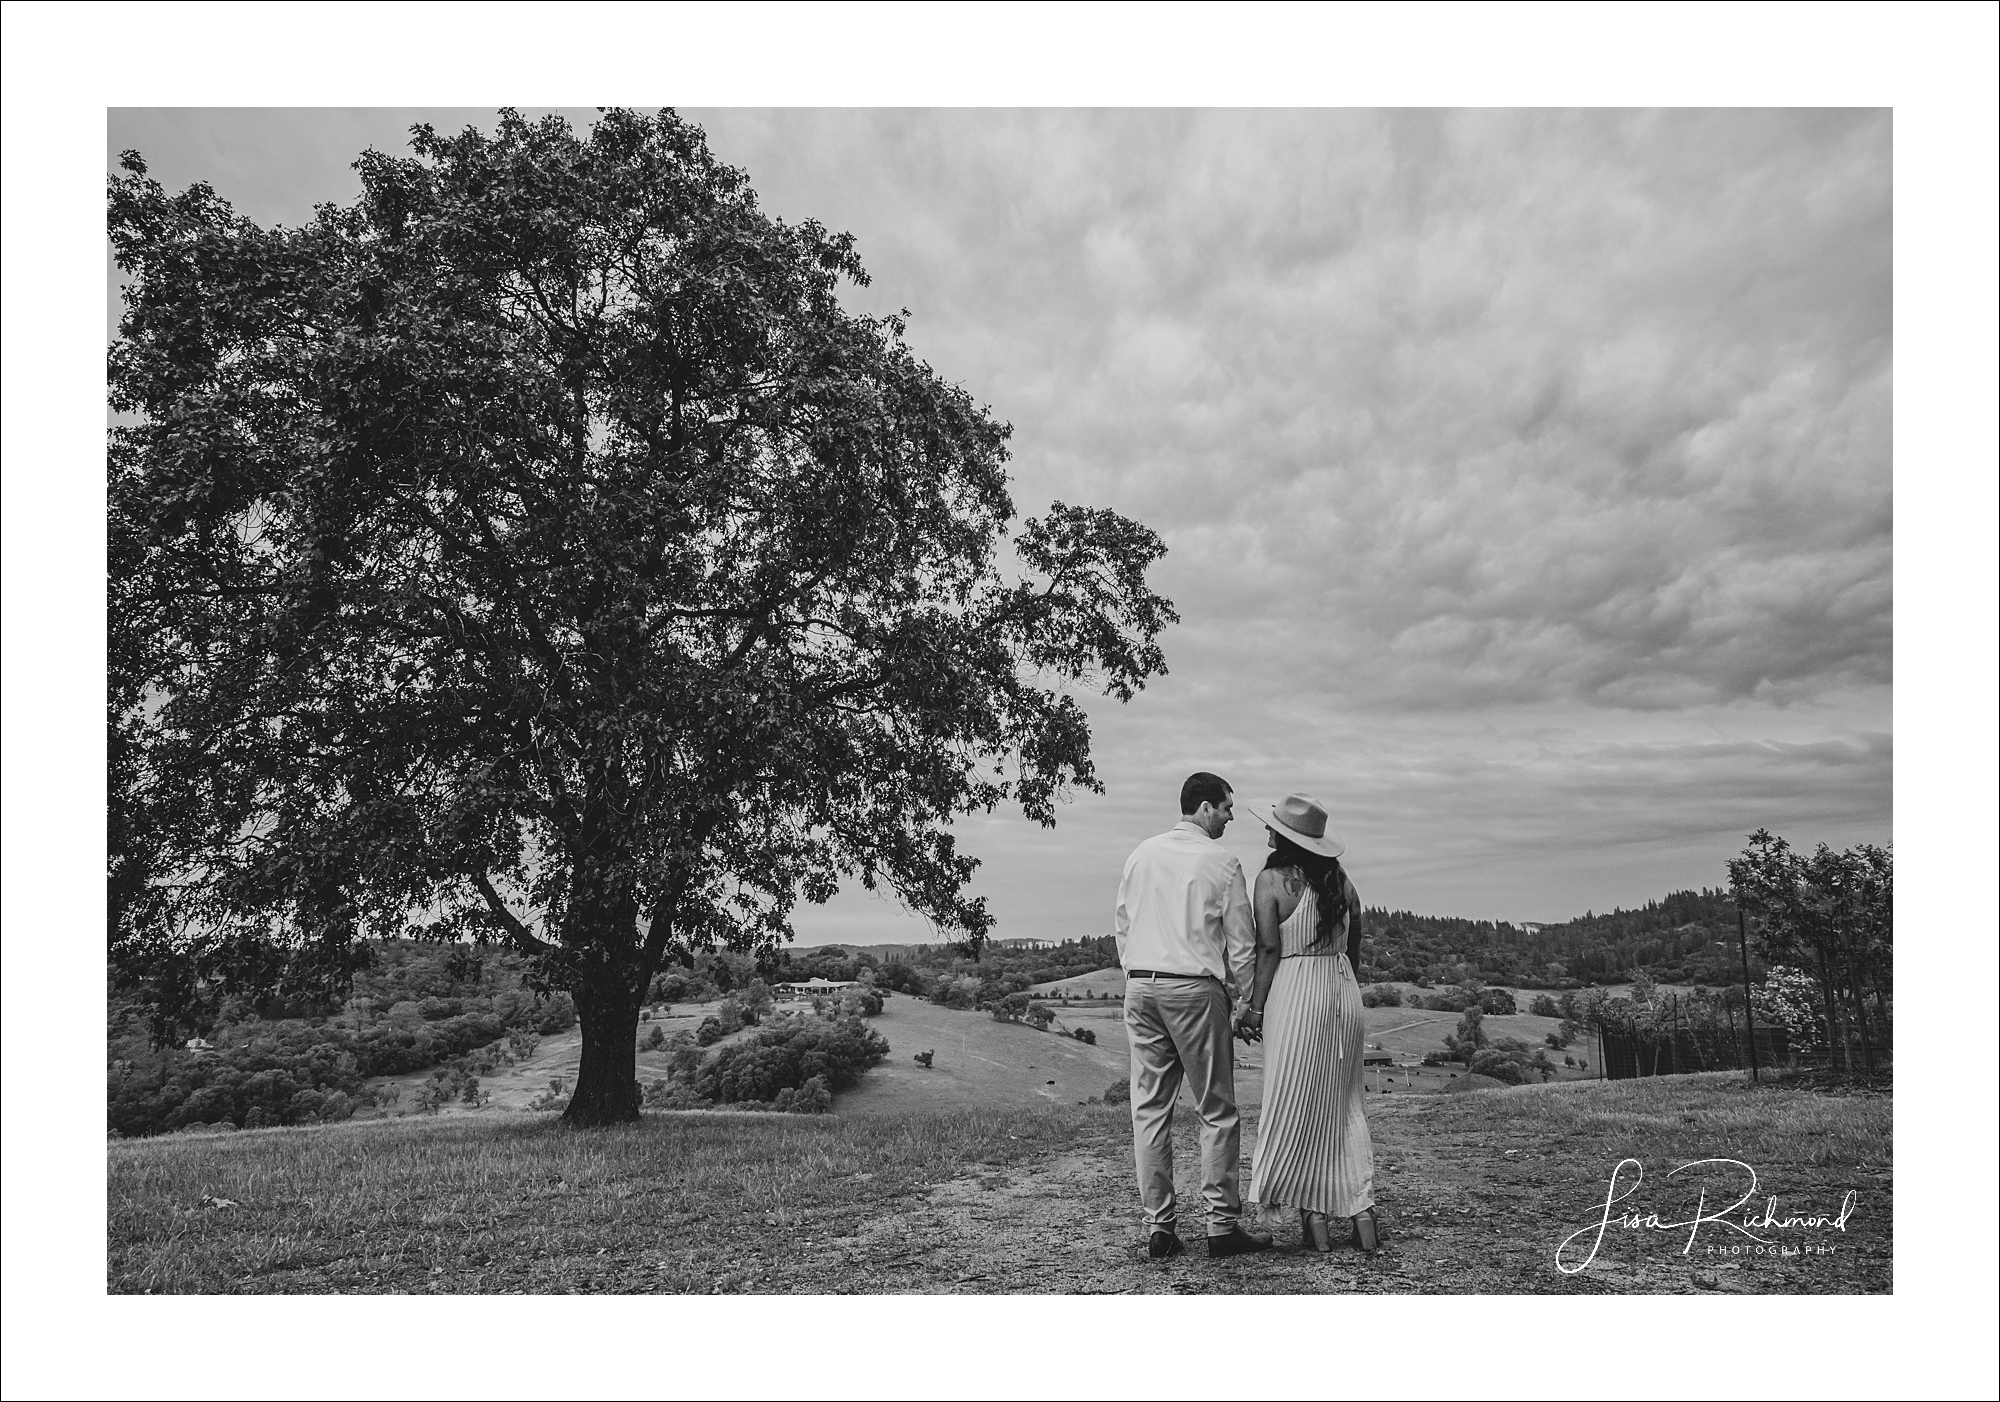 Jessica and Cory- Engagement Session at Black Oak Mountain Vineyards